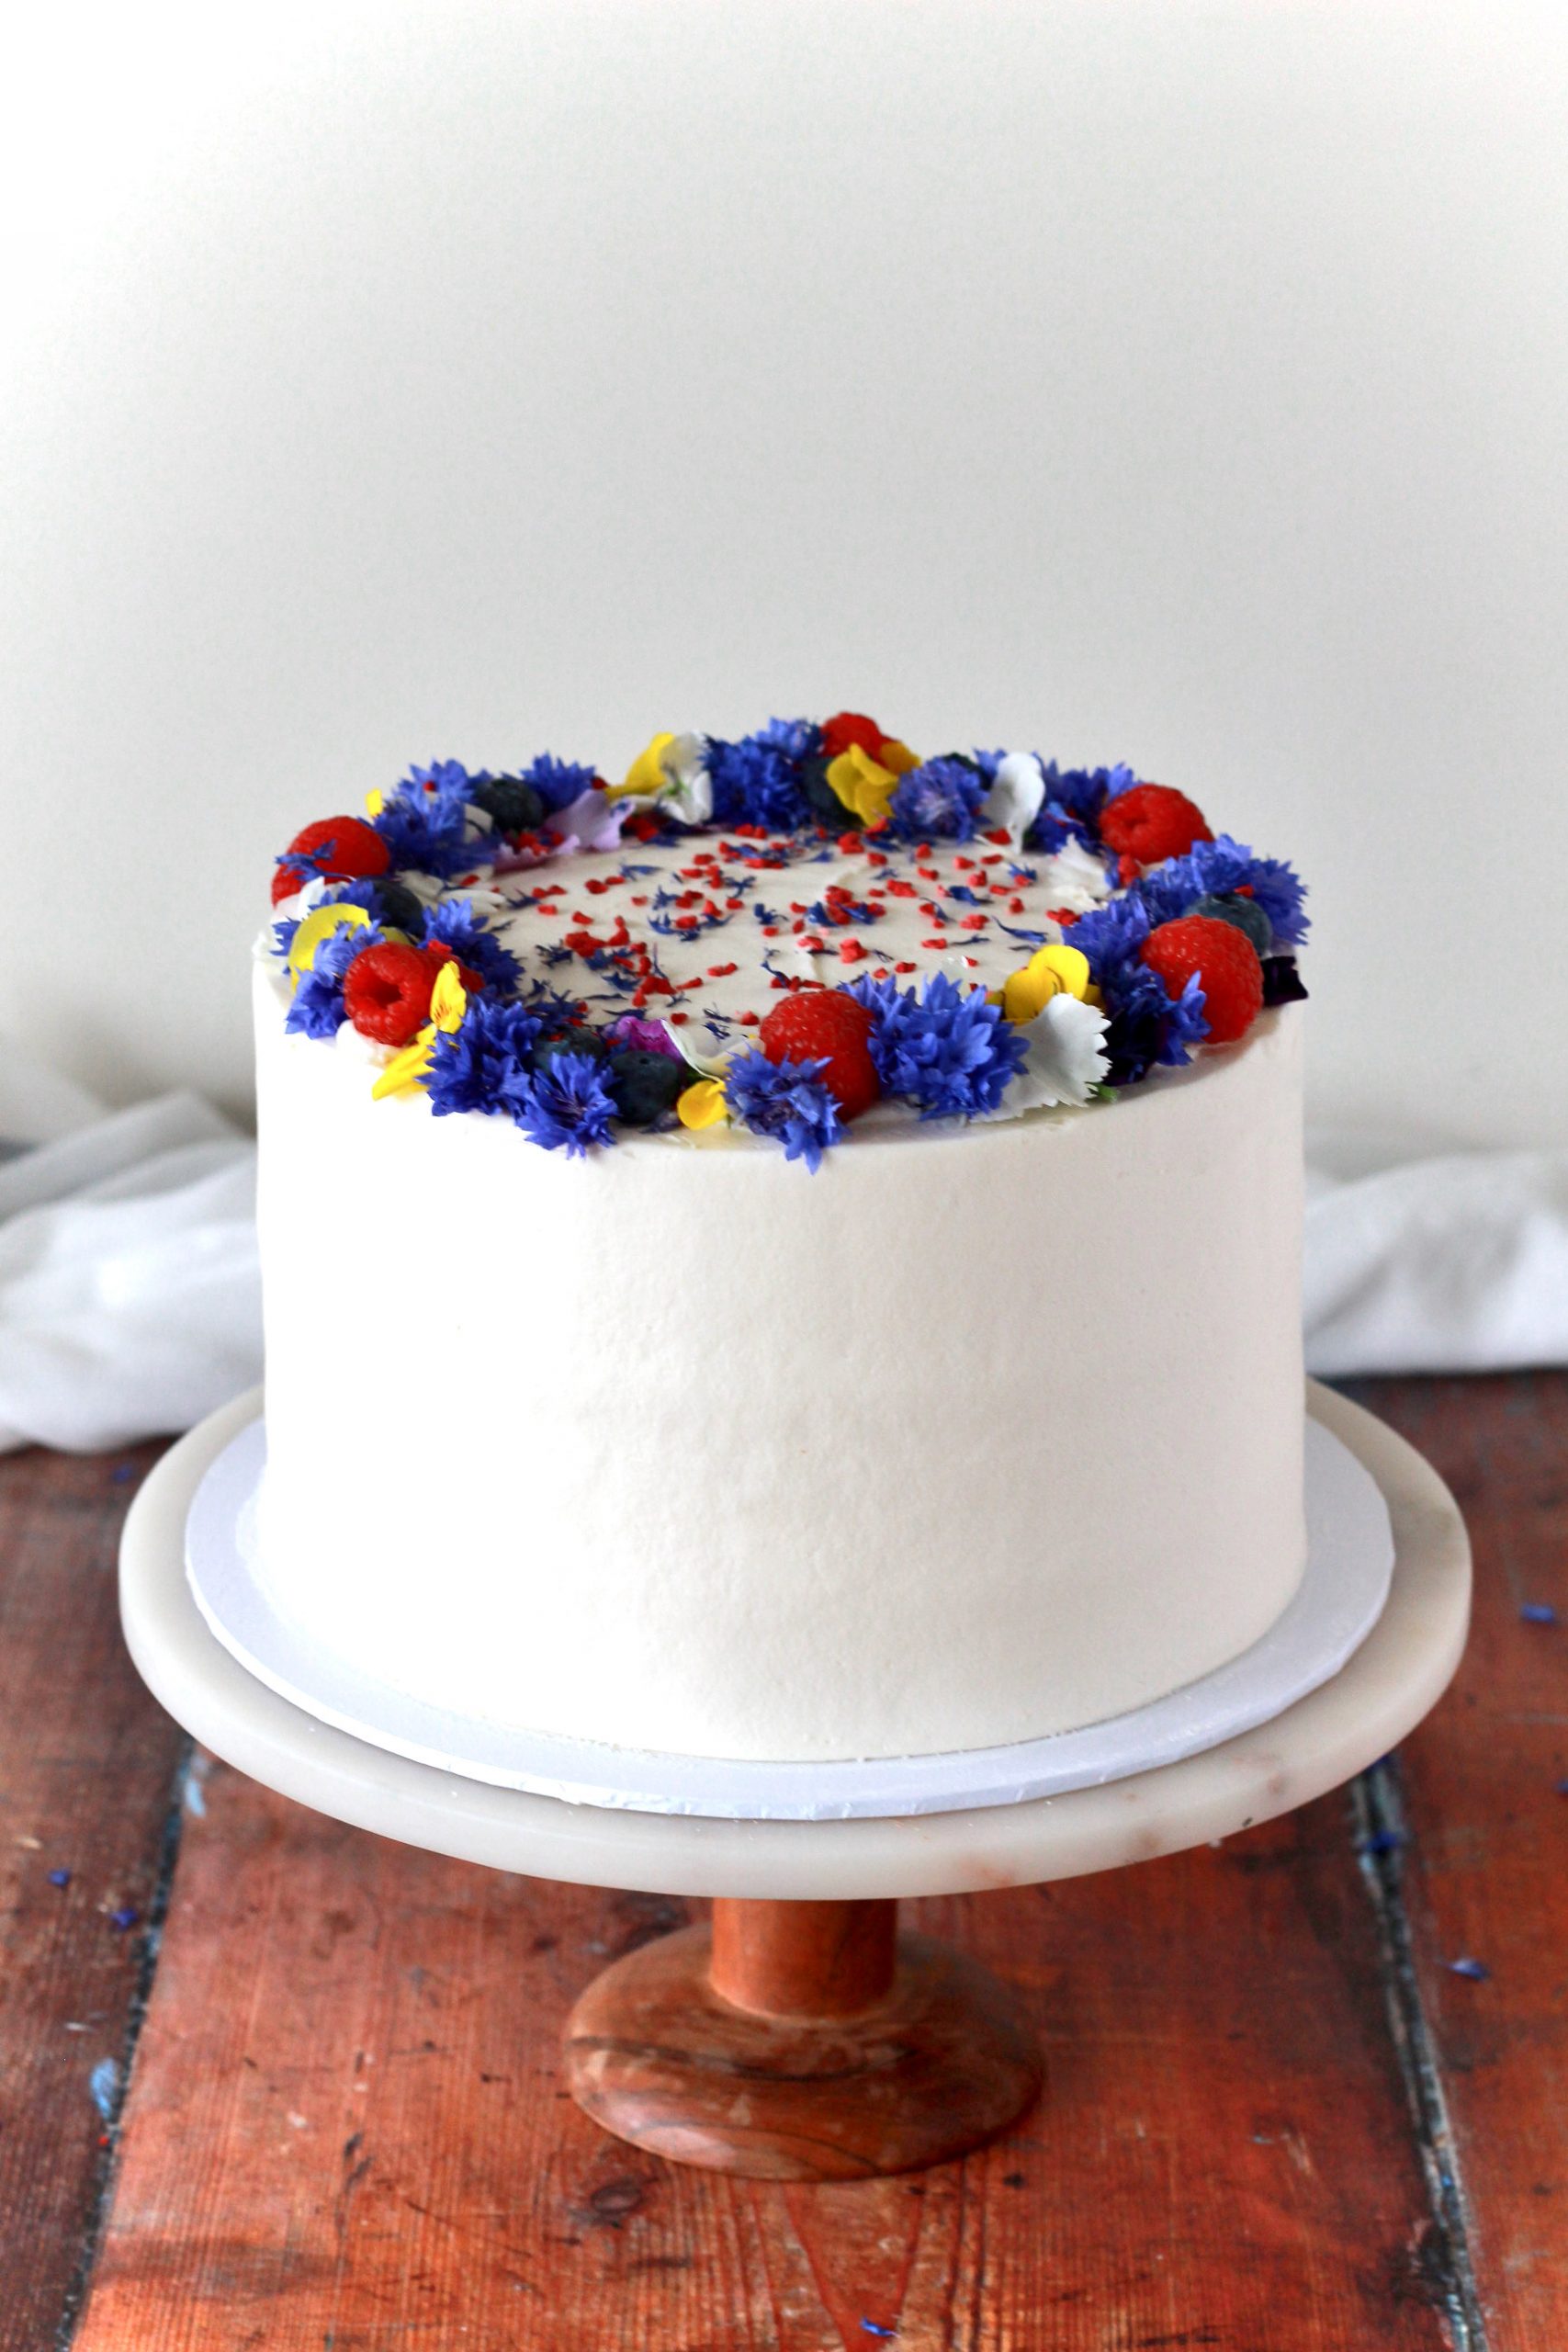 Date and salted caramel cake with fresh fruit and flowers